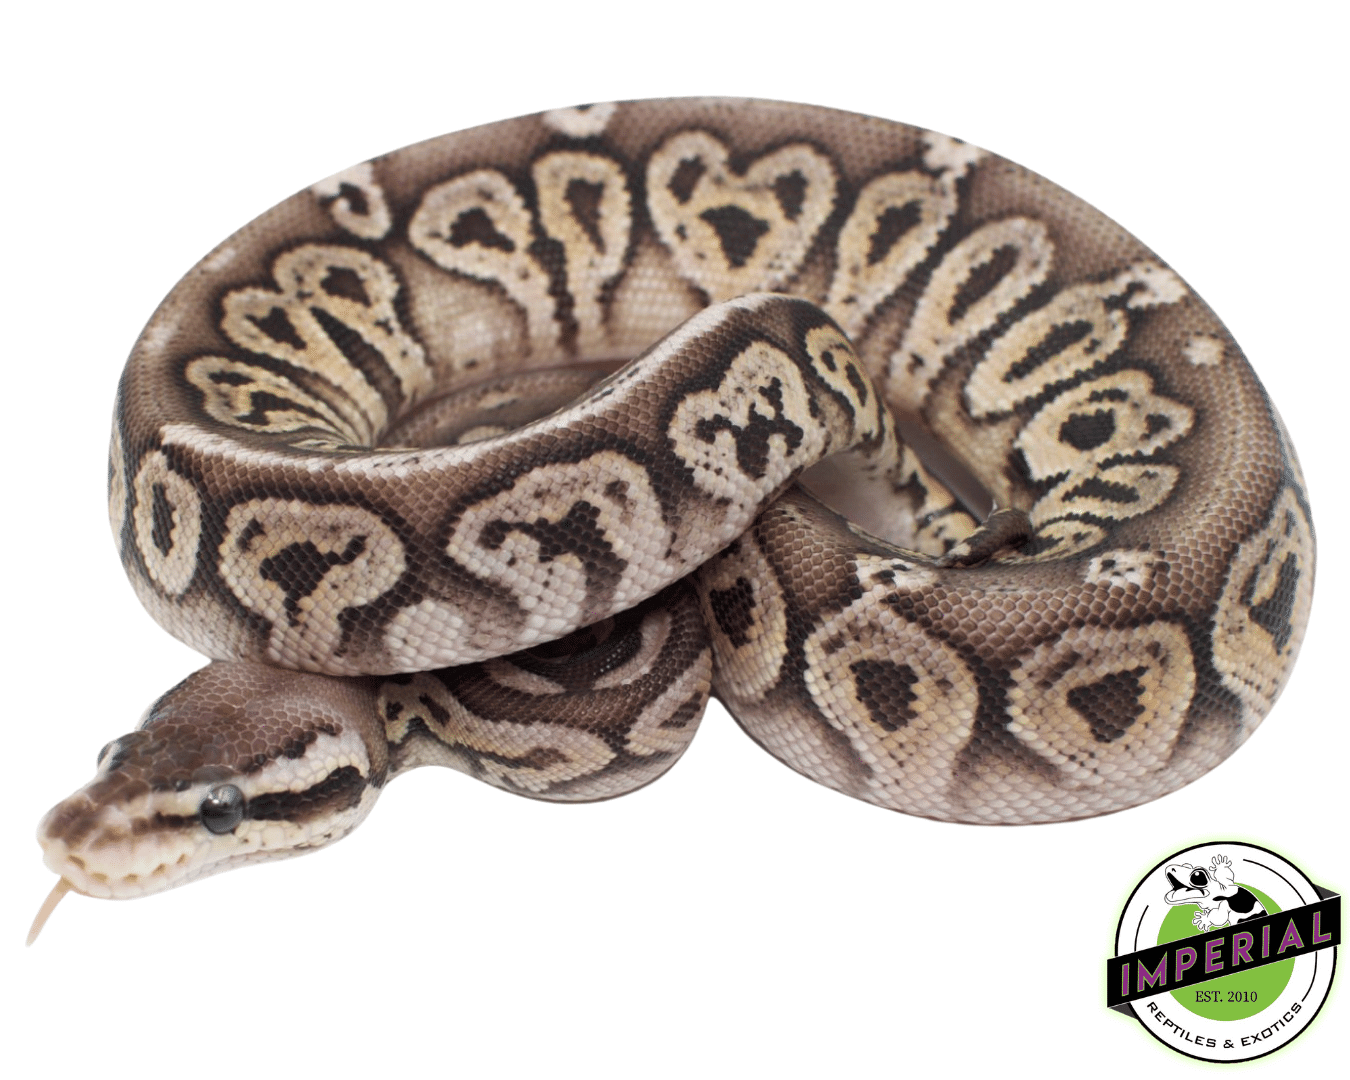 vanilla pewter ball python for sale, buy reptiles online